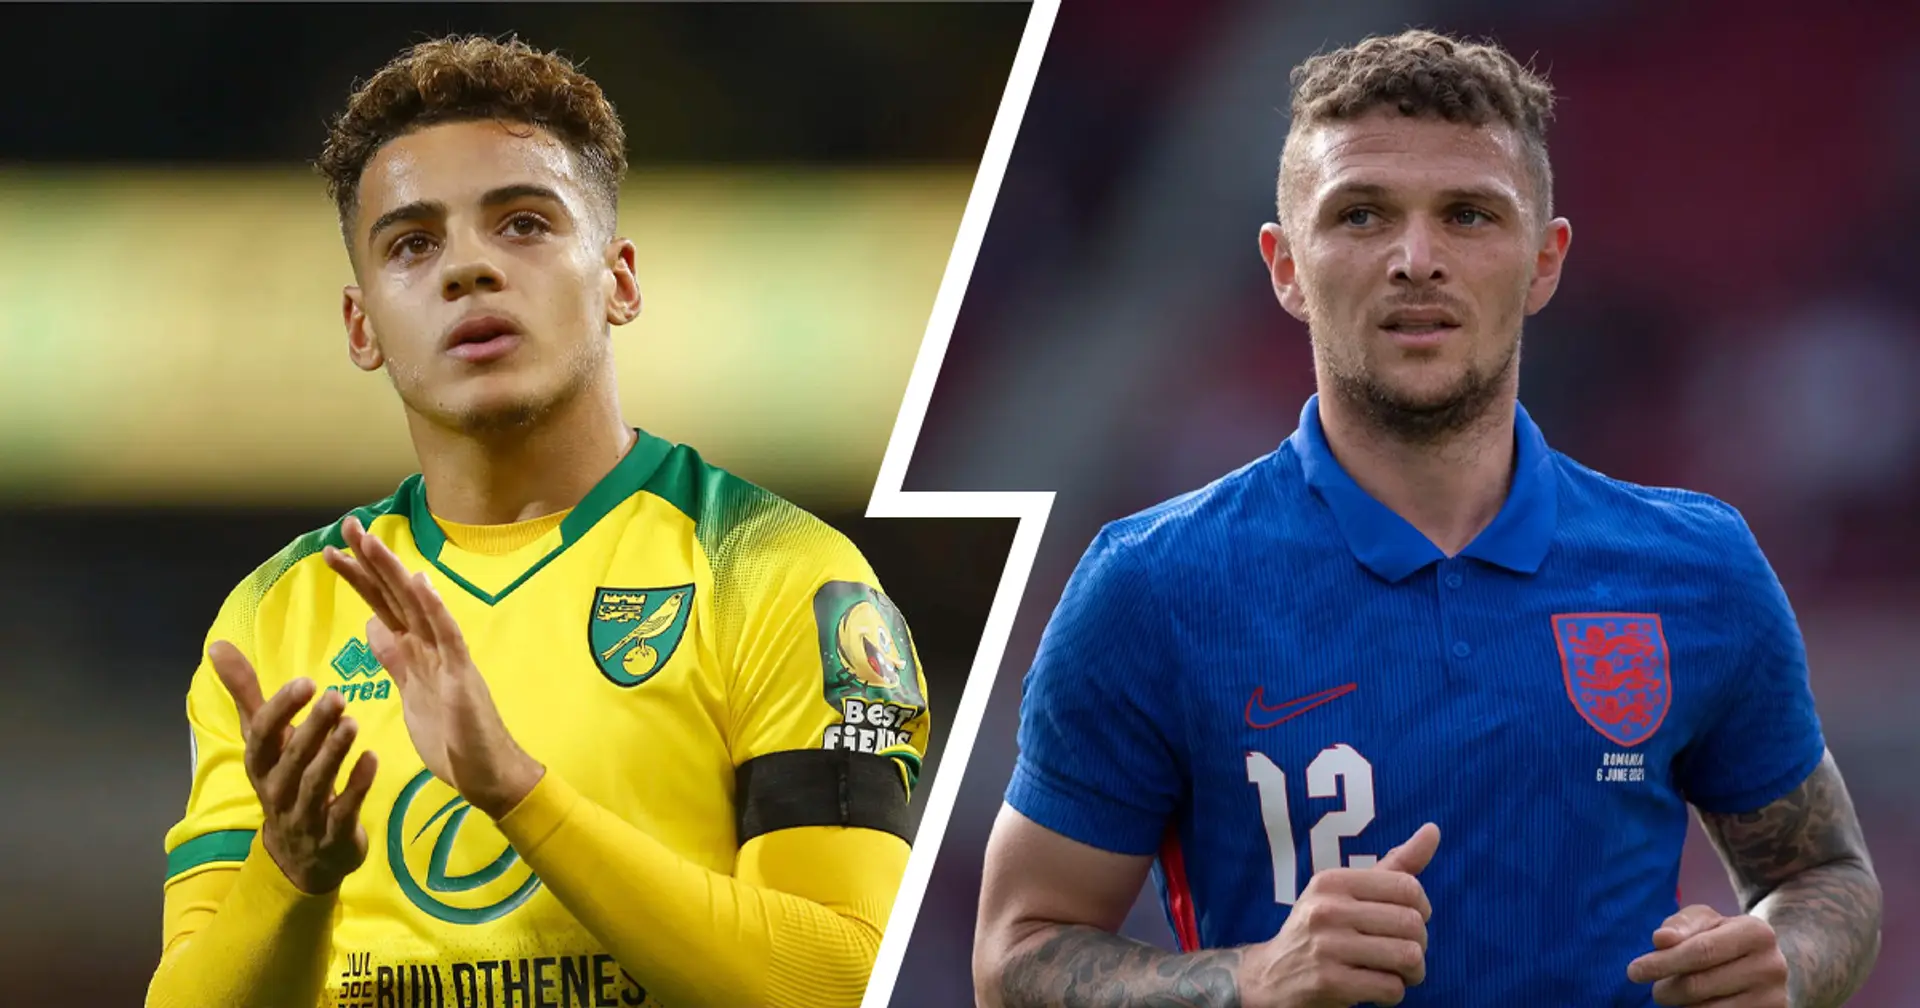 Norwich right-back Aarons identified as possible alternative to Trippier (reliability: 4 stars)